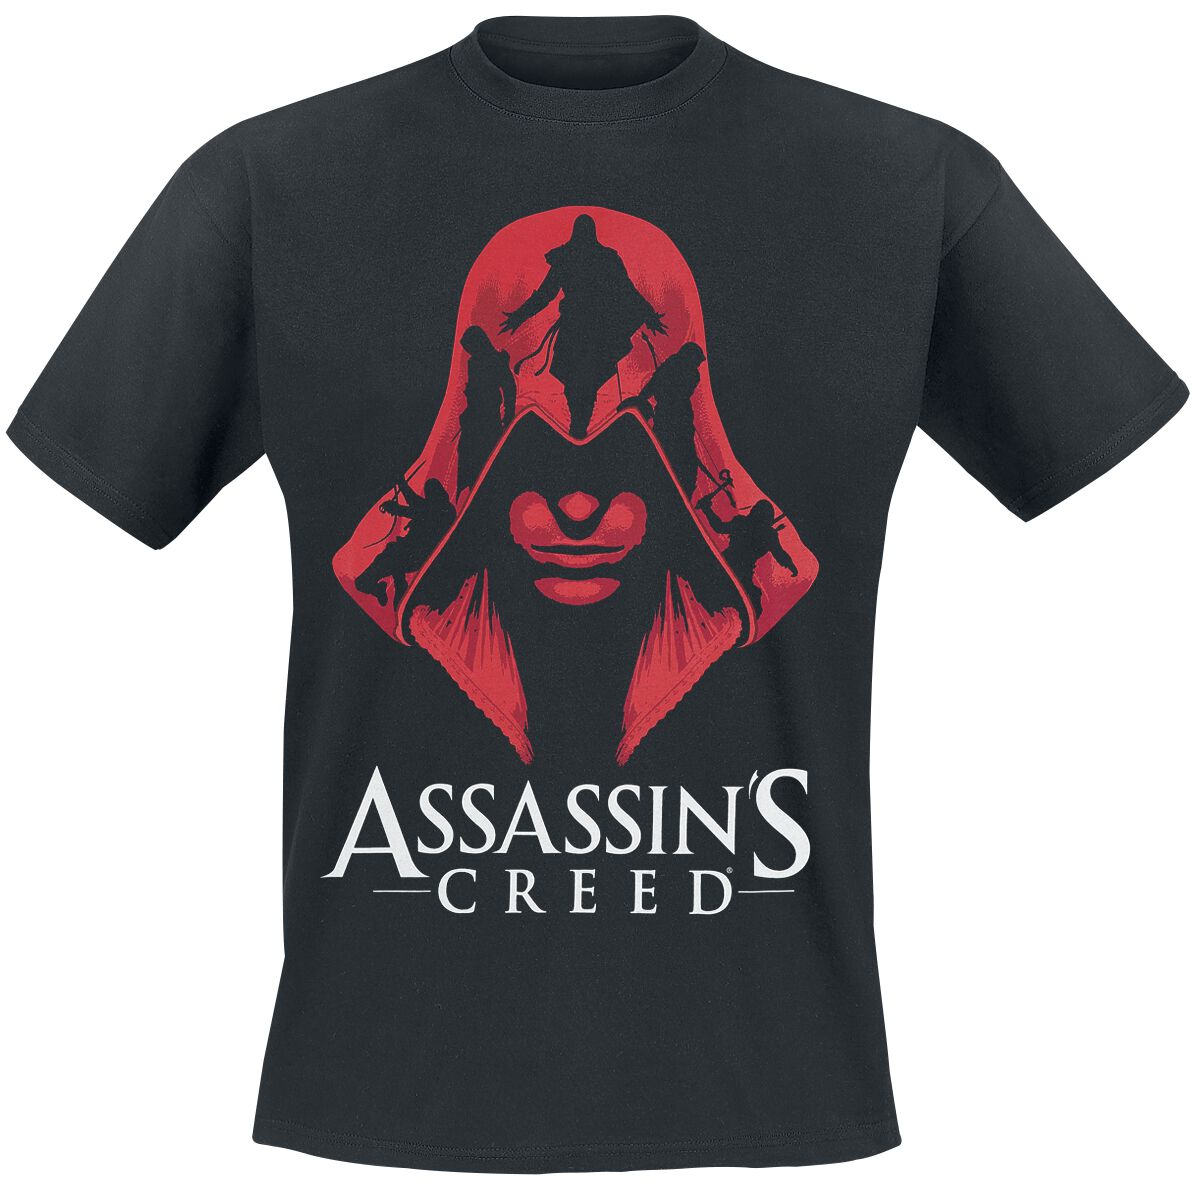 Assassin's Creed Silhouettes T-Shirt black